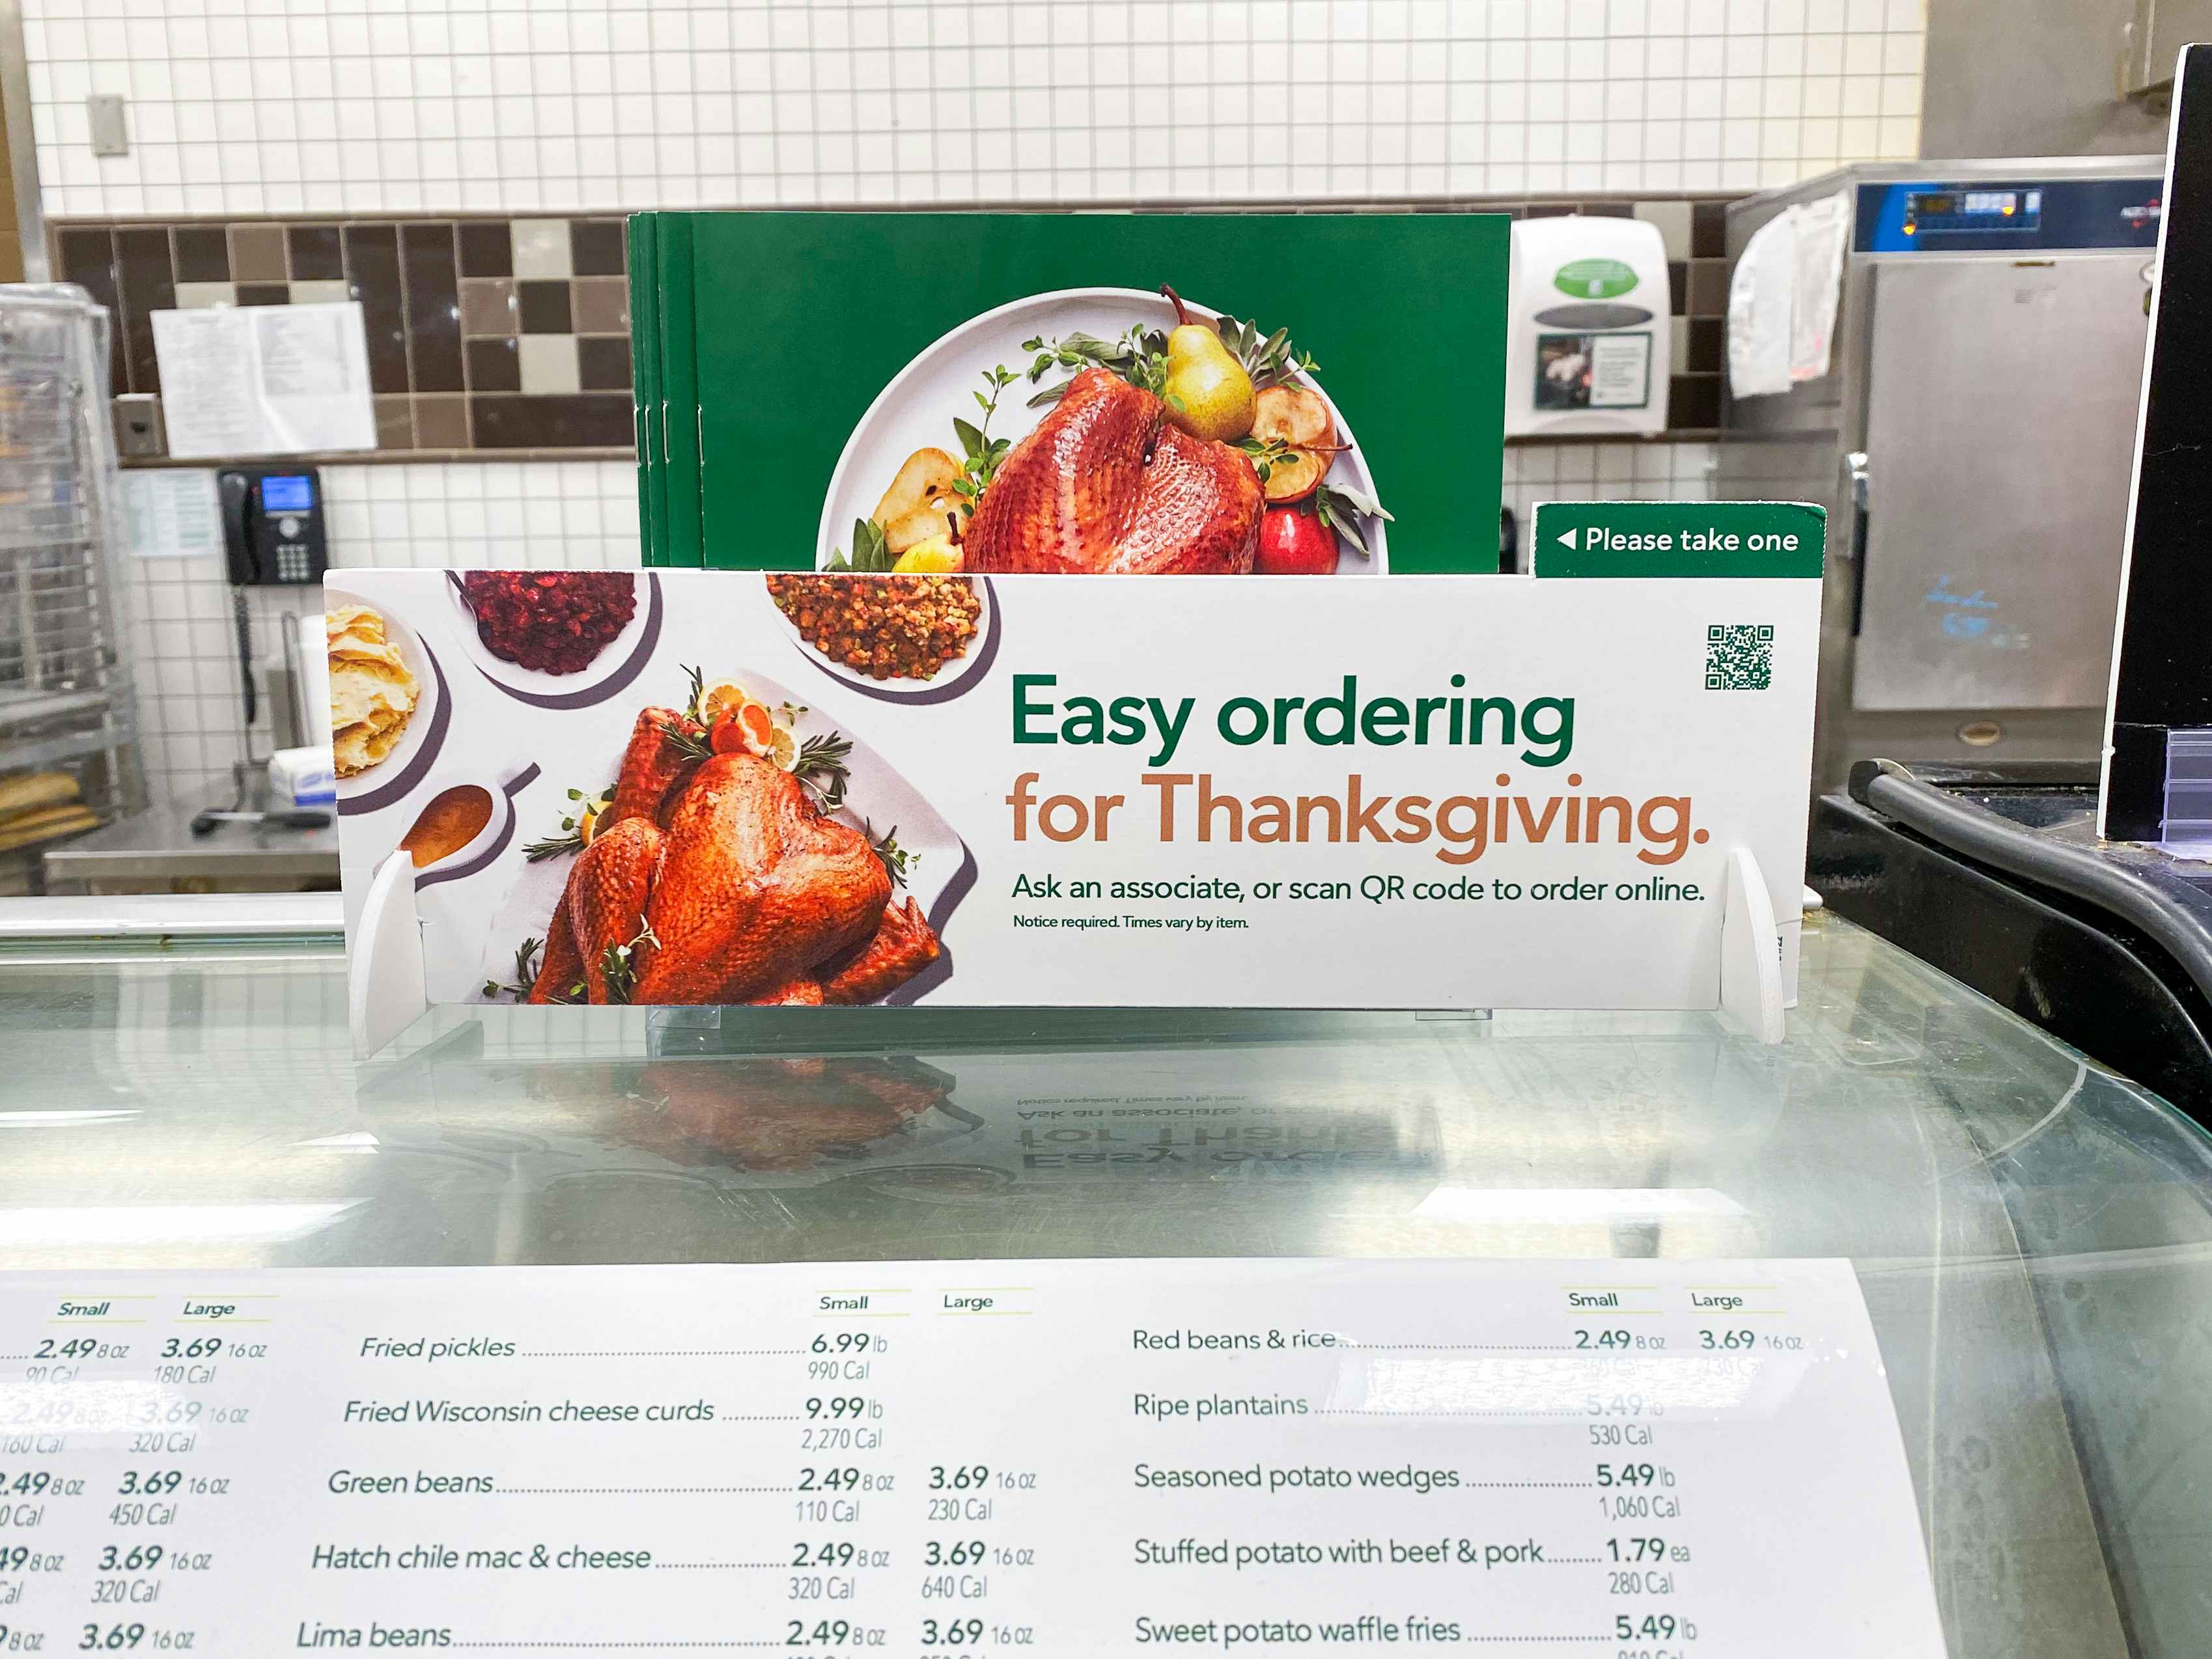 A sign in the Publix Deli that says, "Easy ordering for Thanksgiving" with some booklets to take.